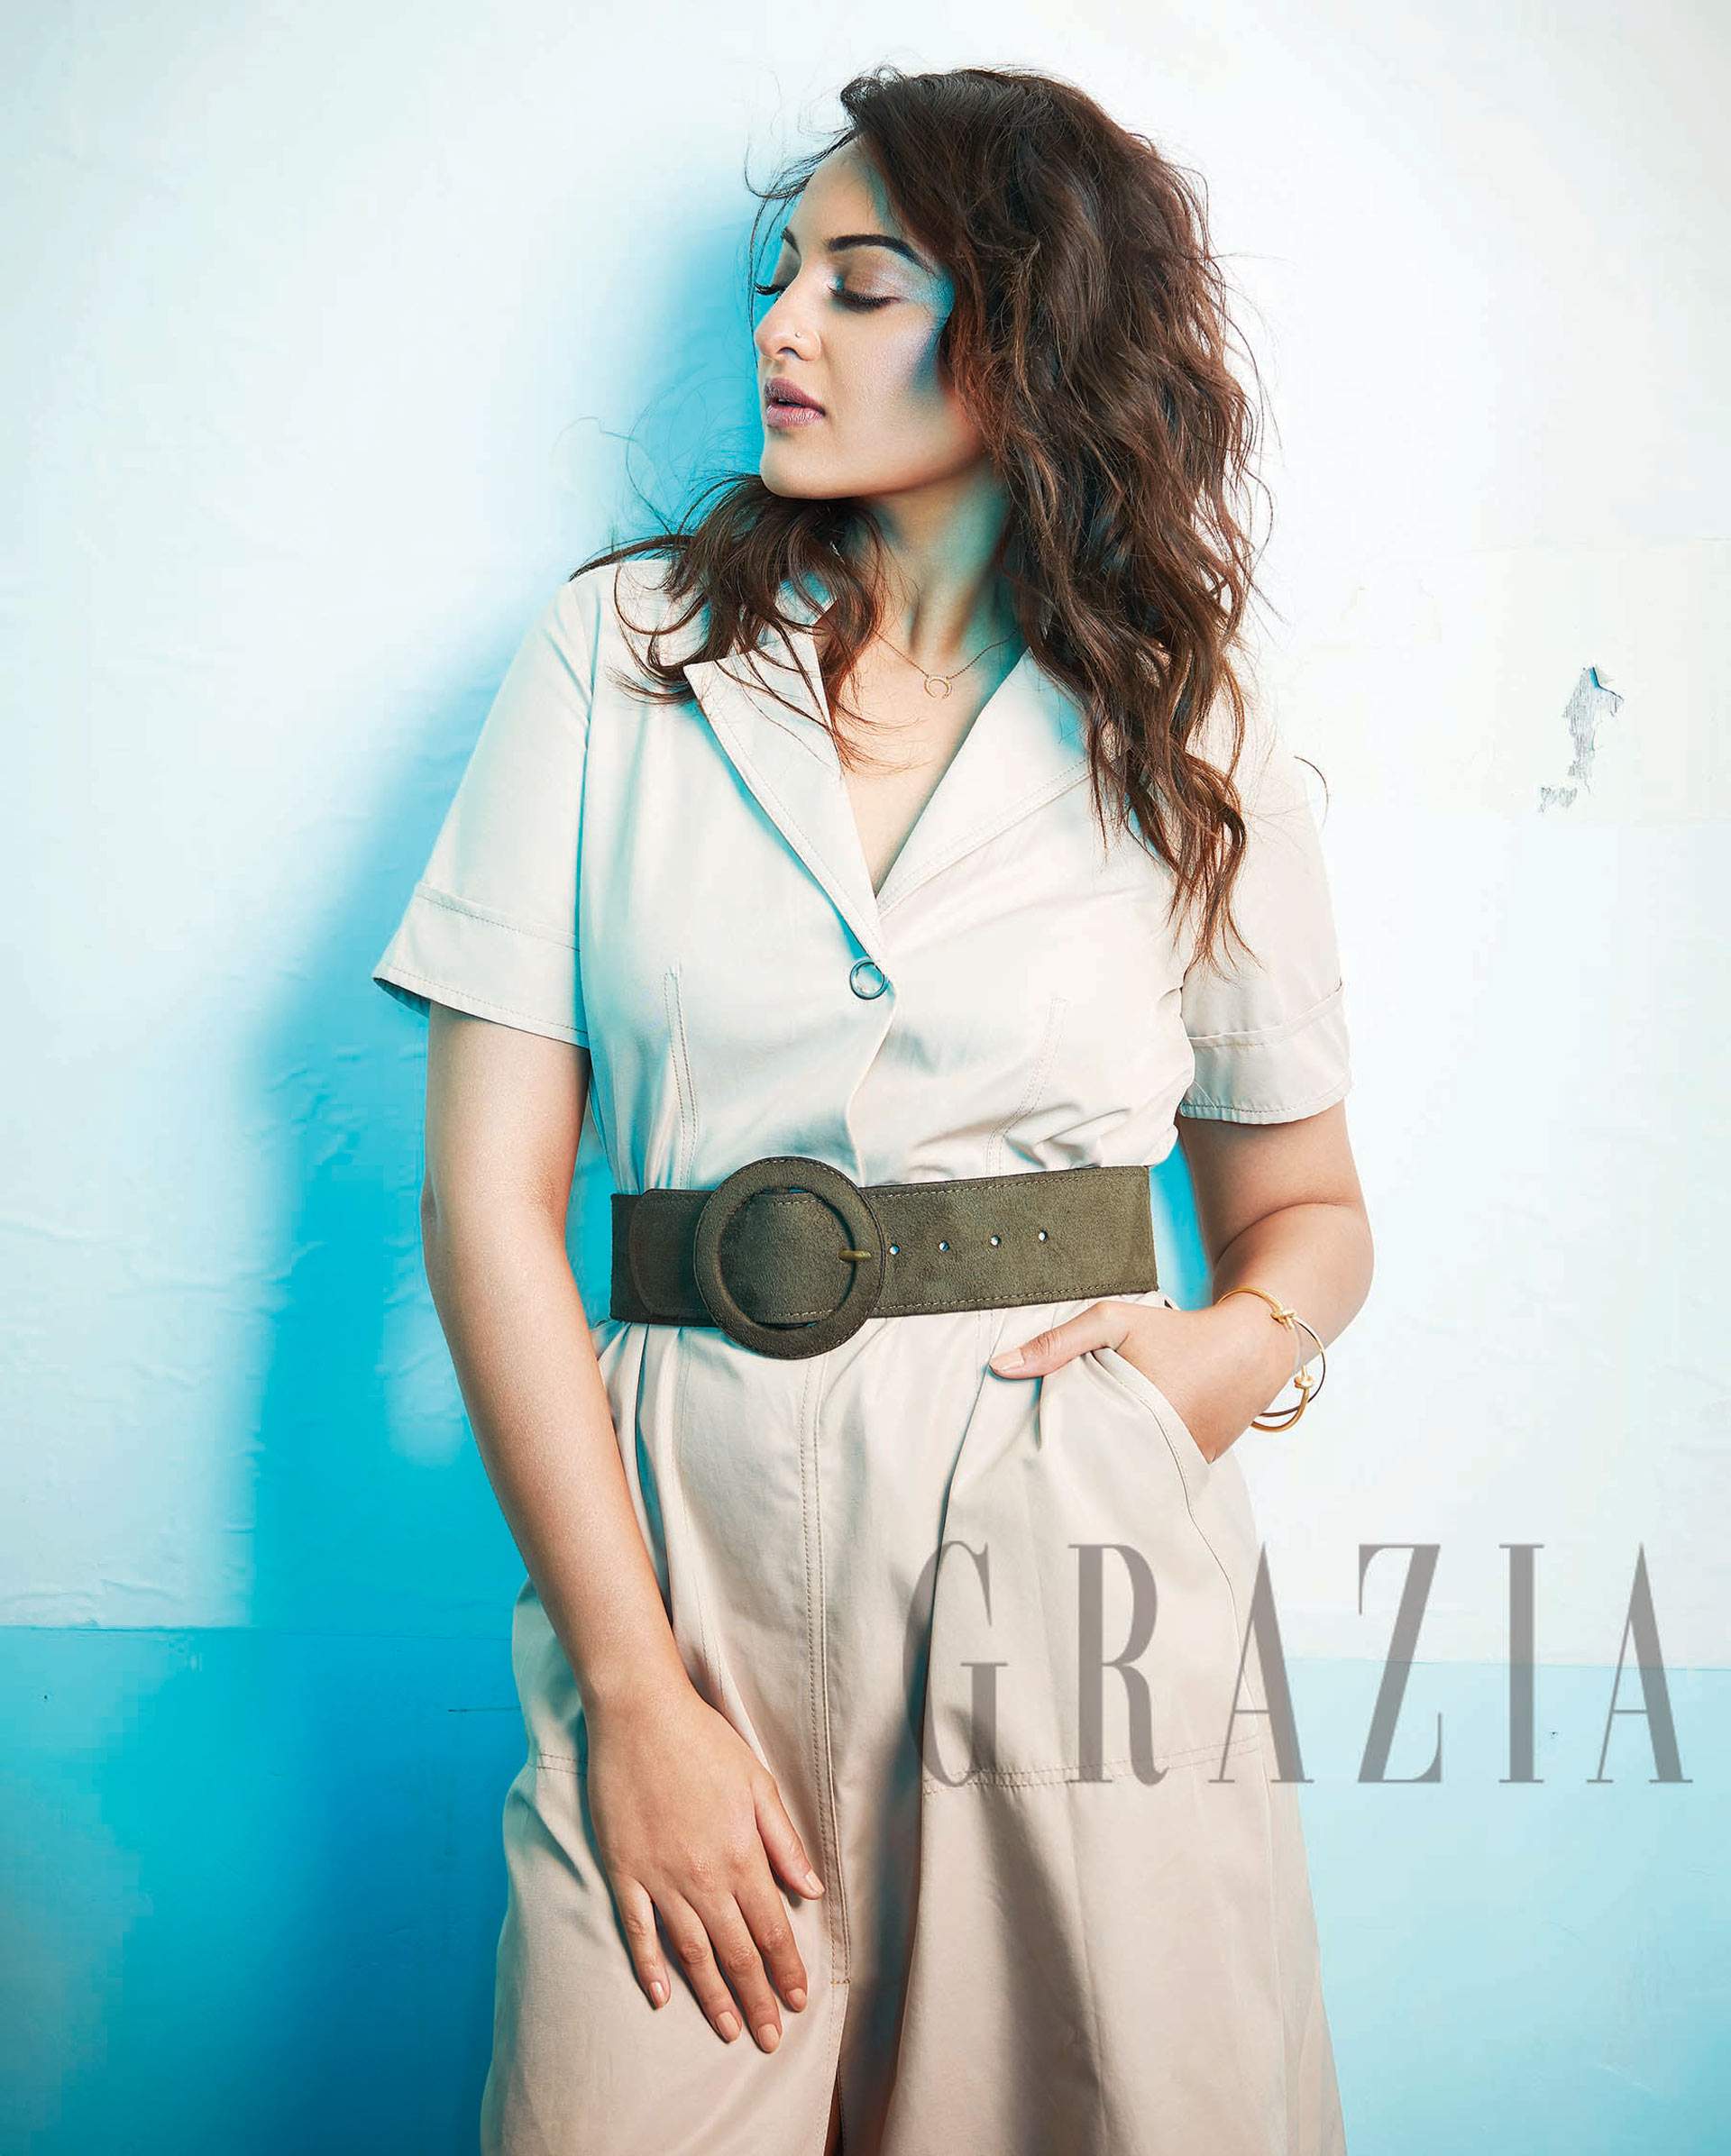 Sonakshi Sinha cover story